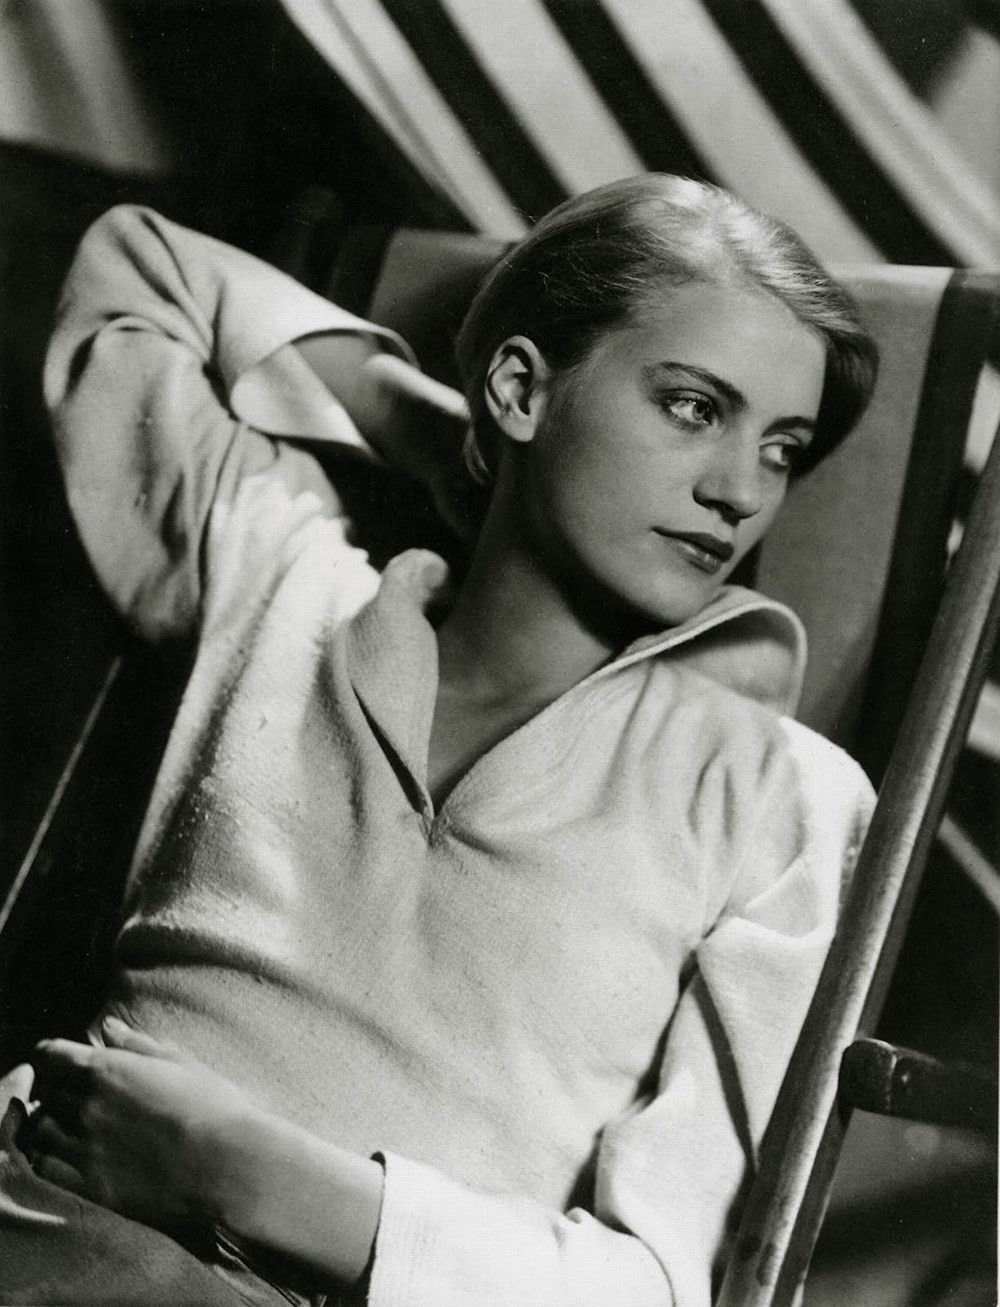 Lessons We Can Learn From Lee Miller